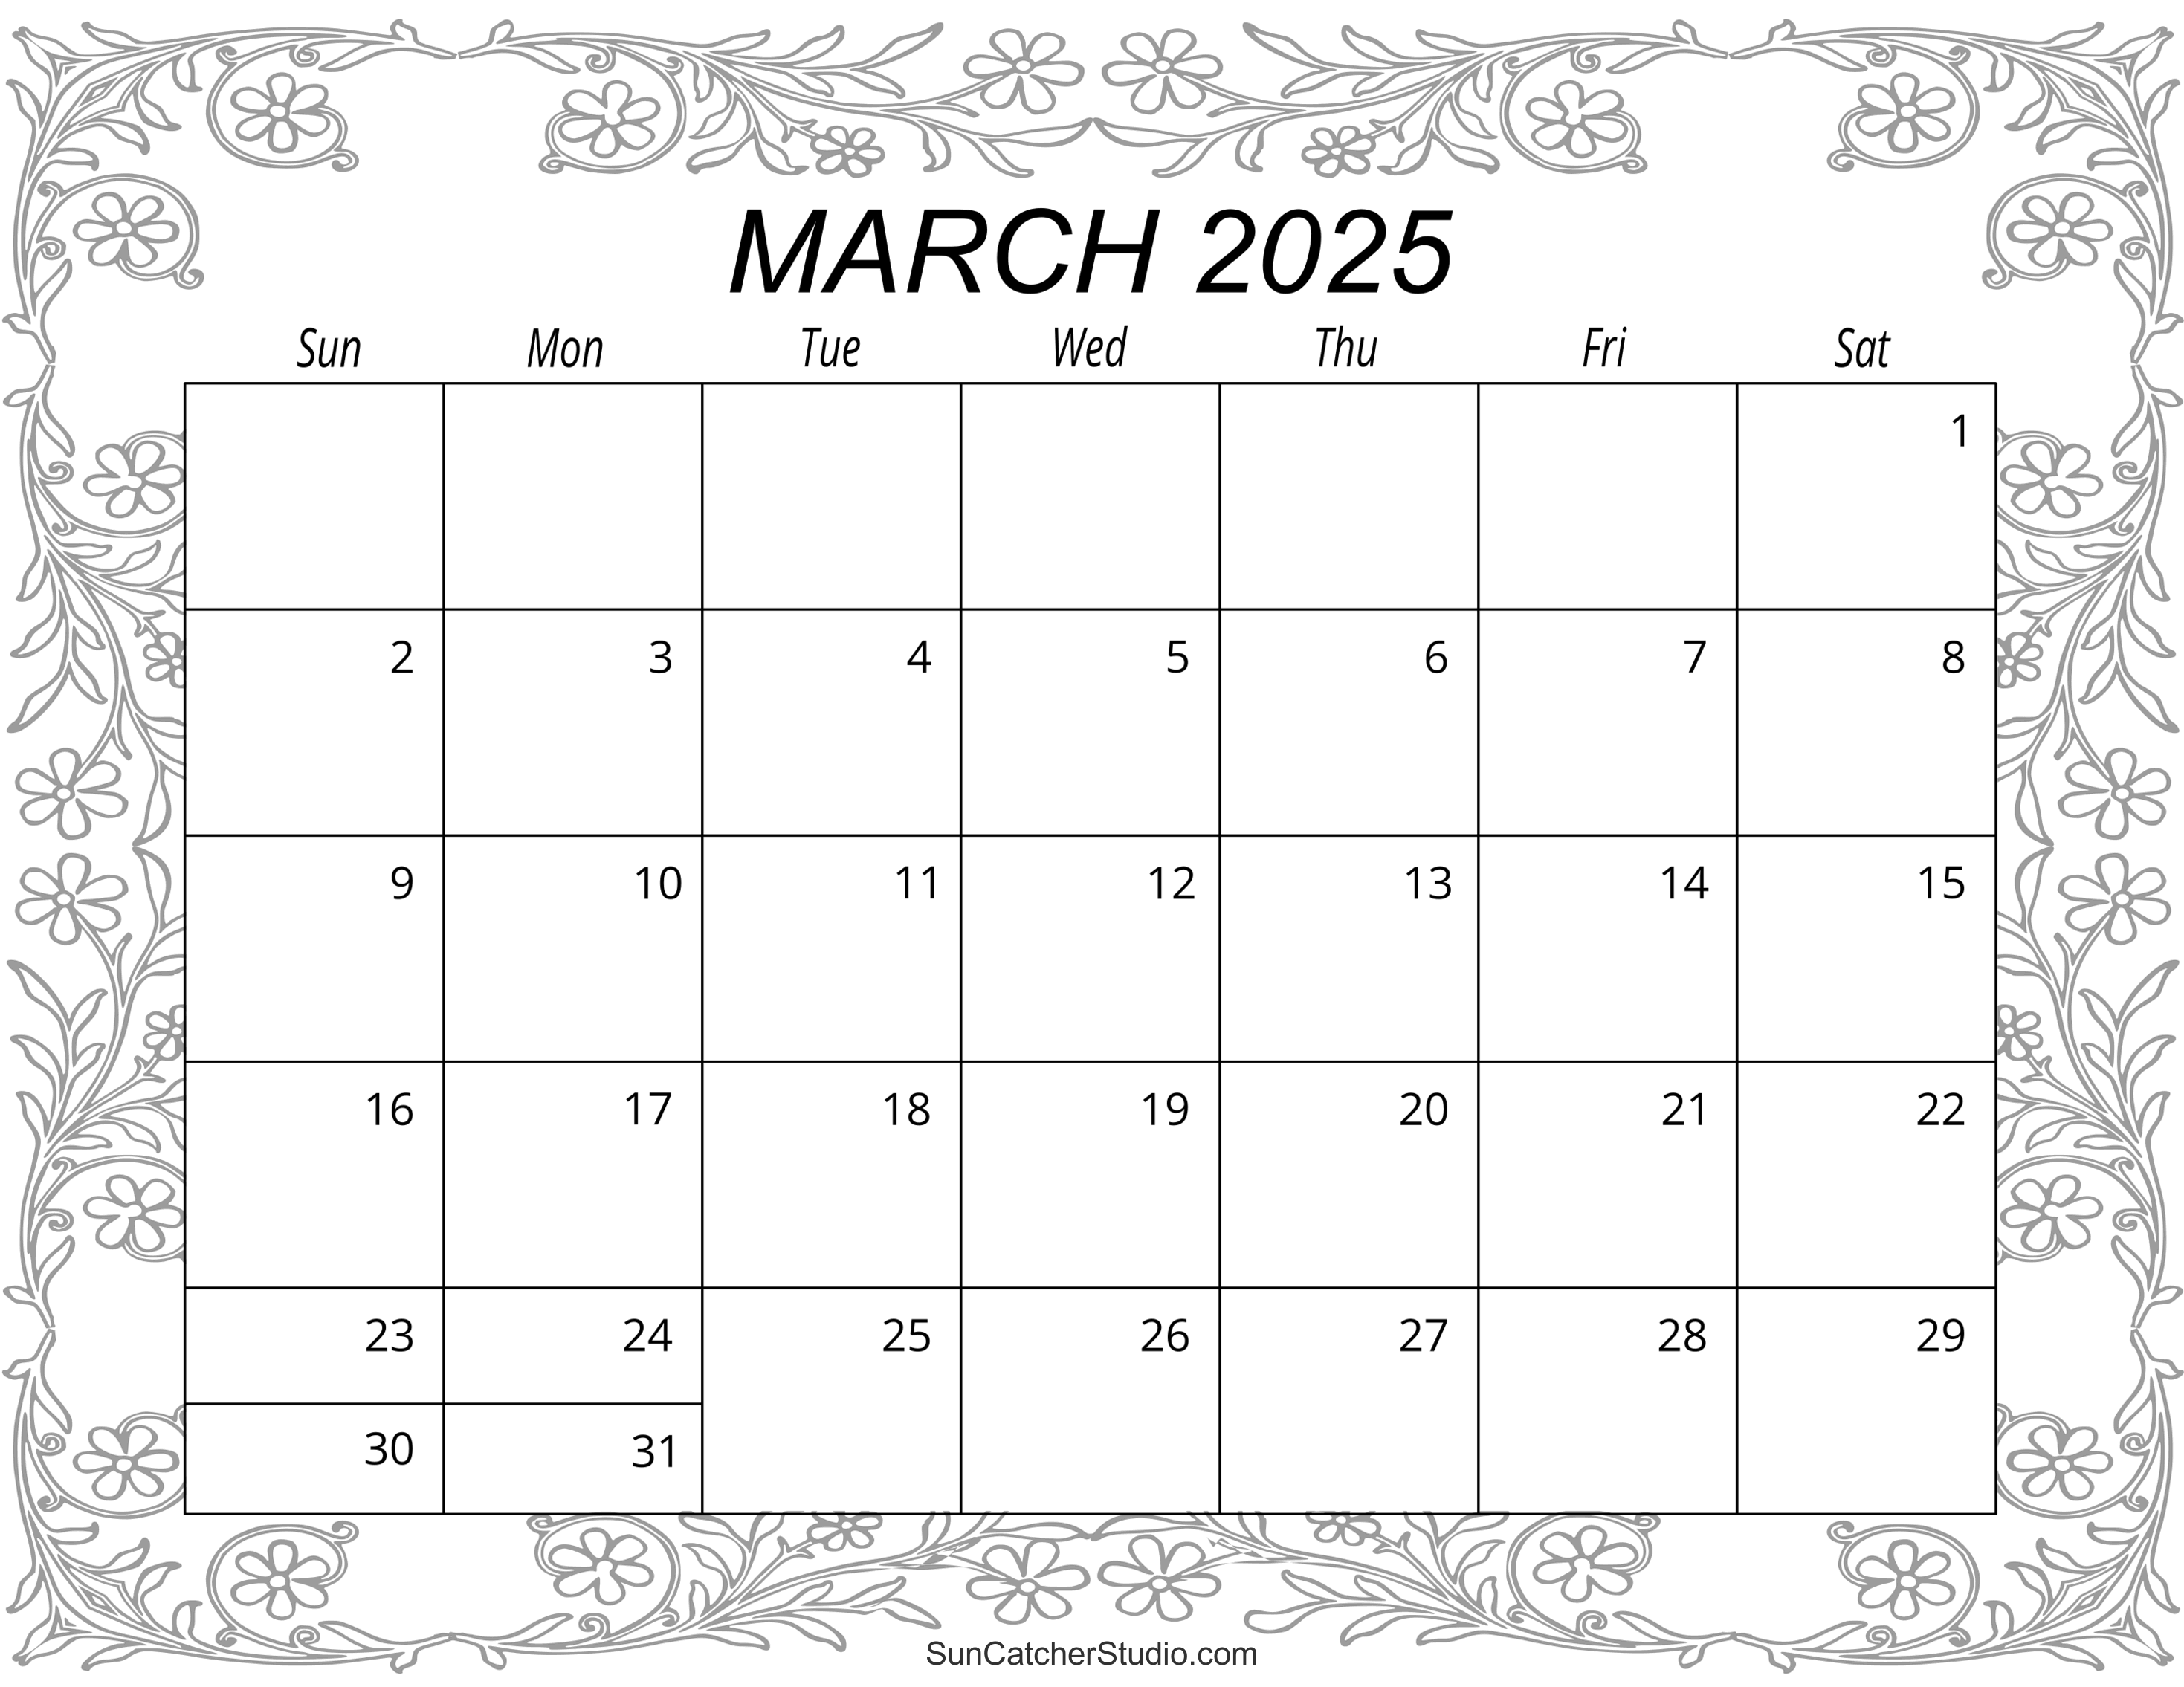 March 2025 Calendar (Free Printable) DIY Projects Patterns